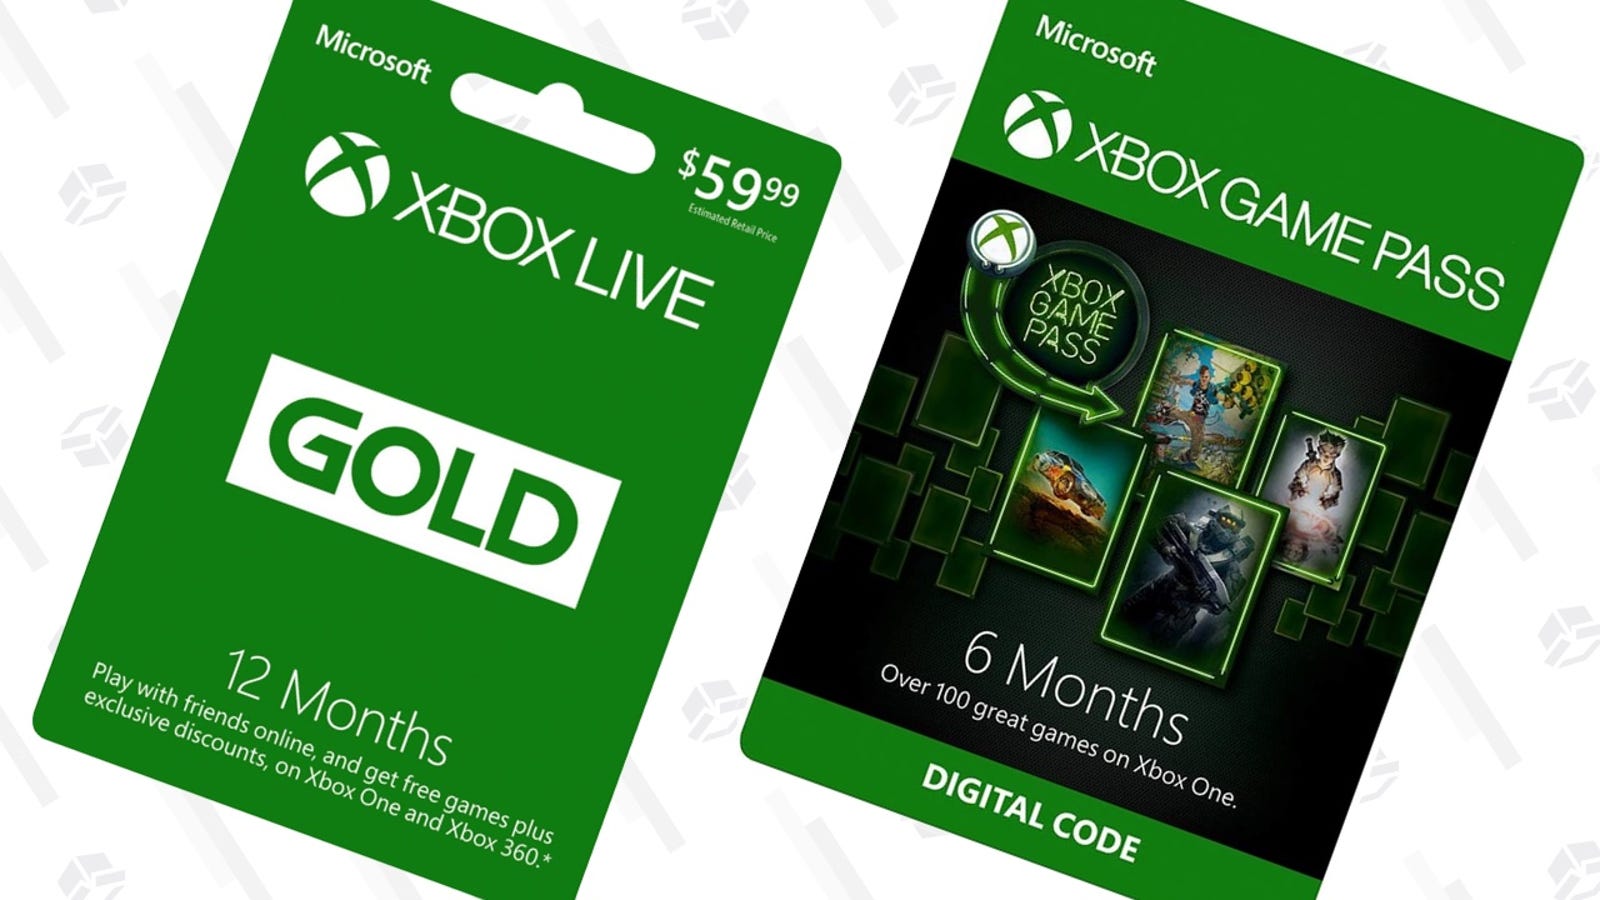 xbox live gold in combination with game pass